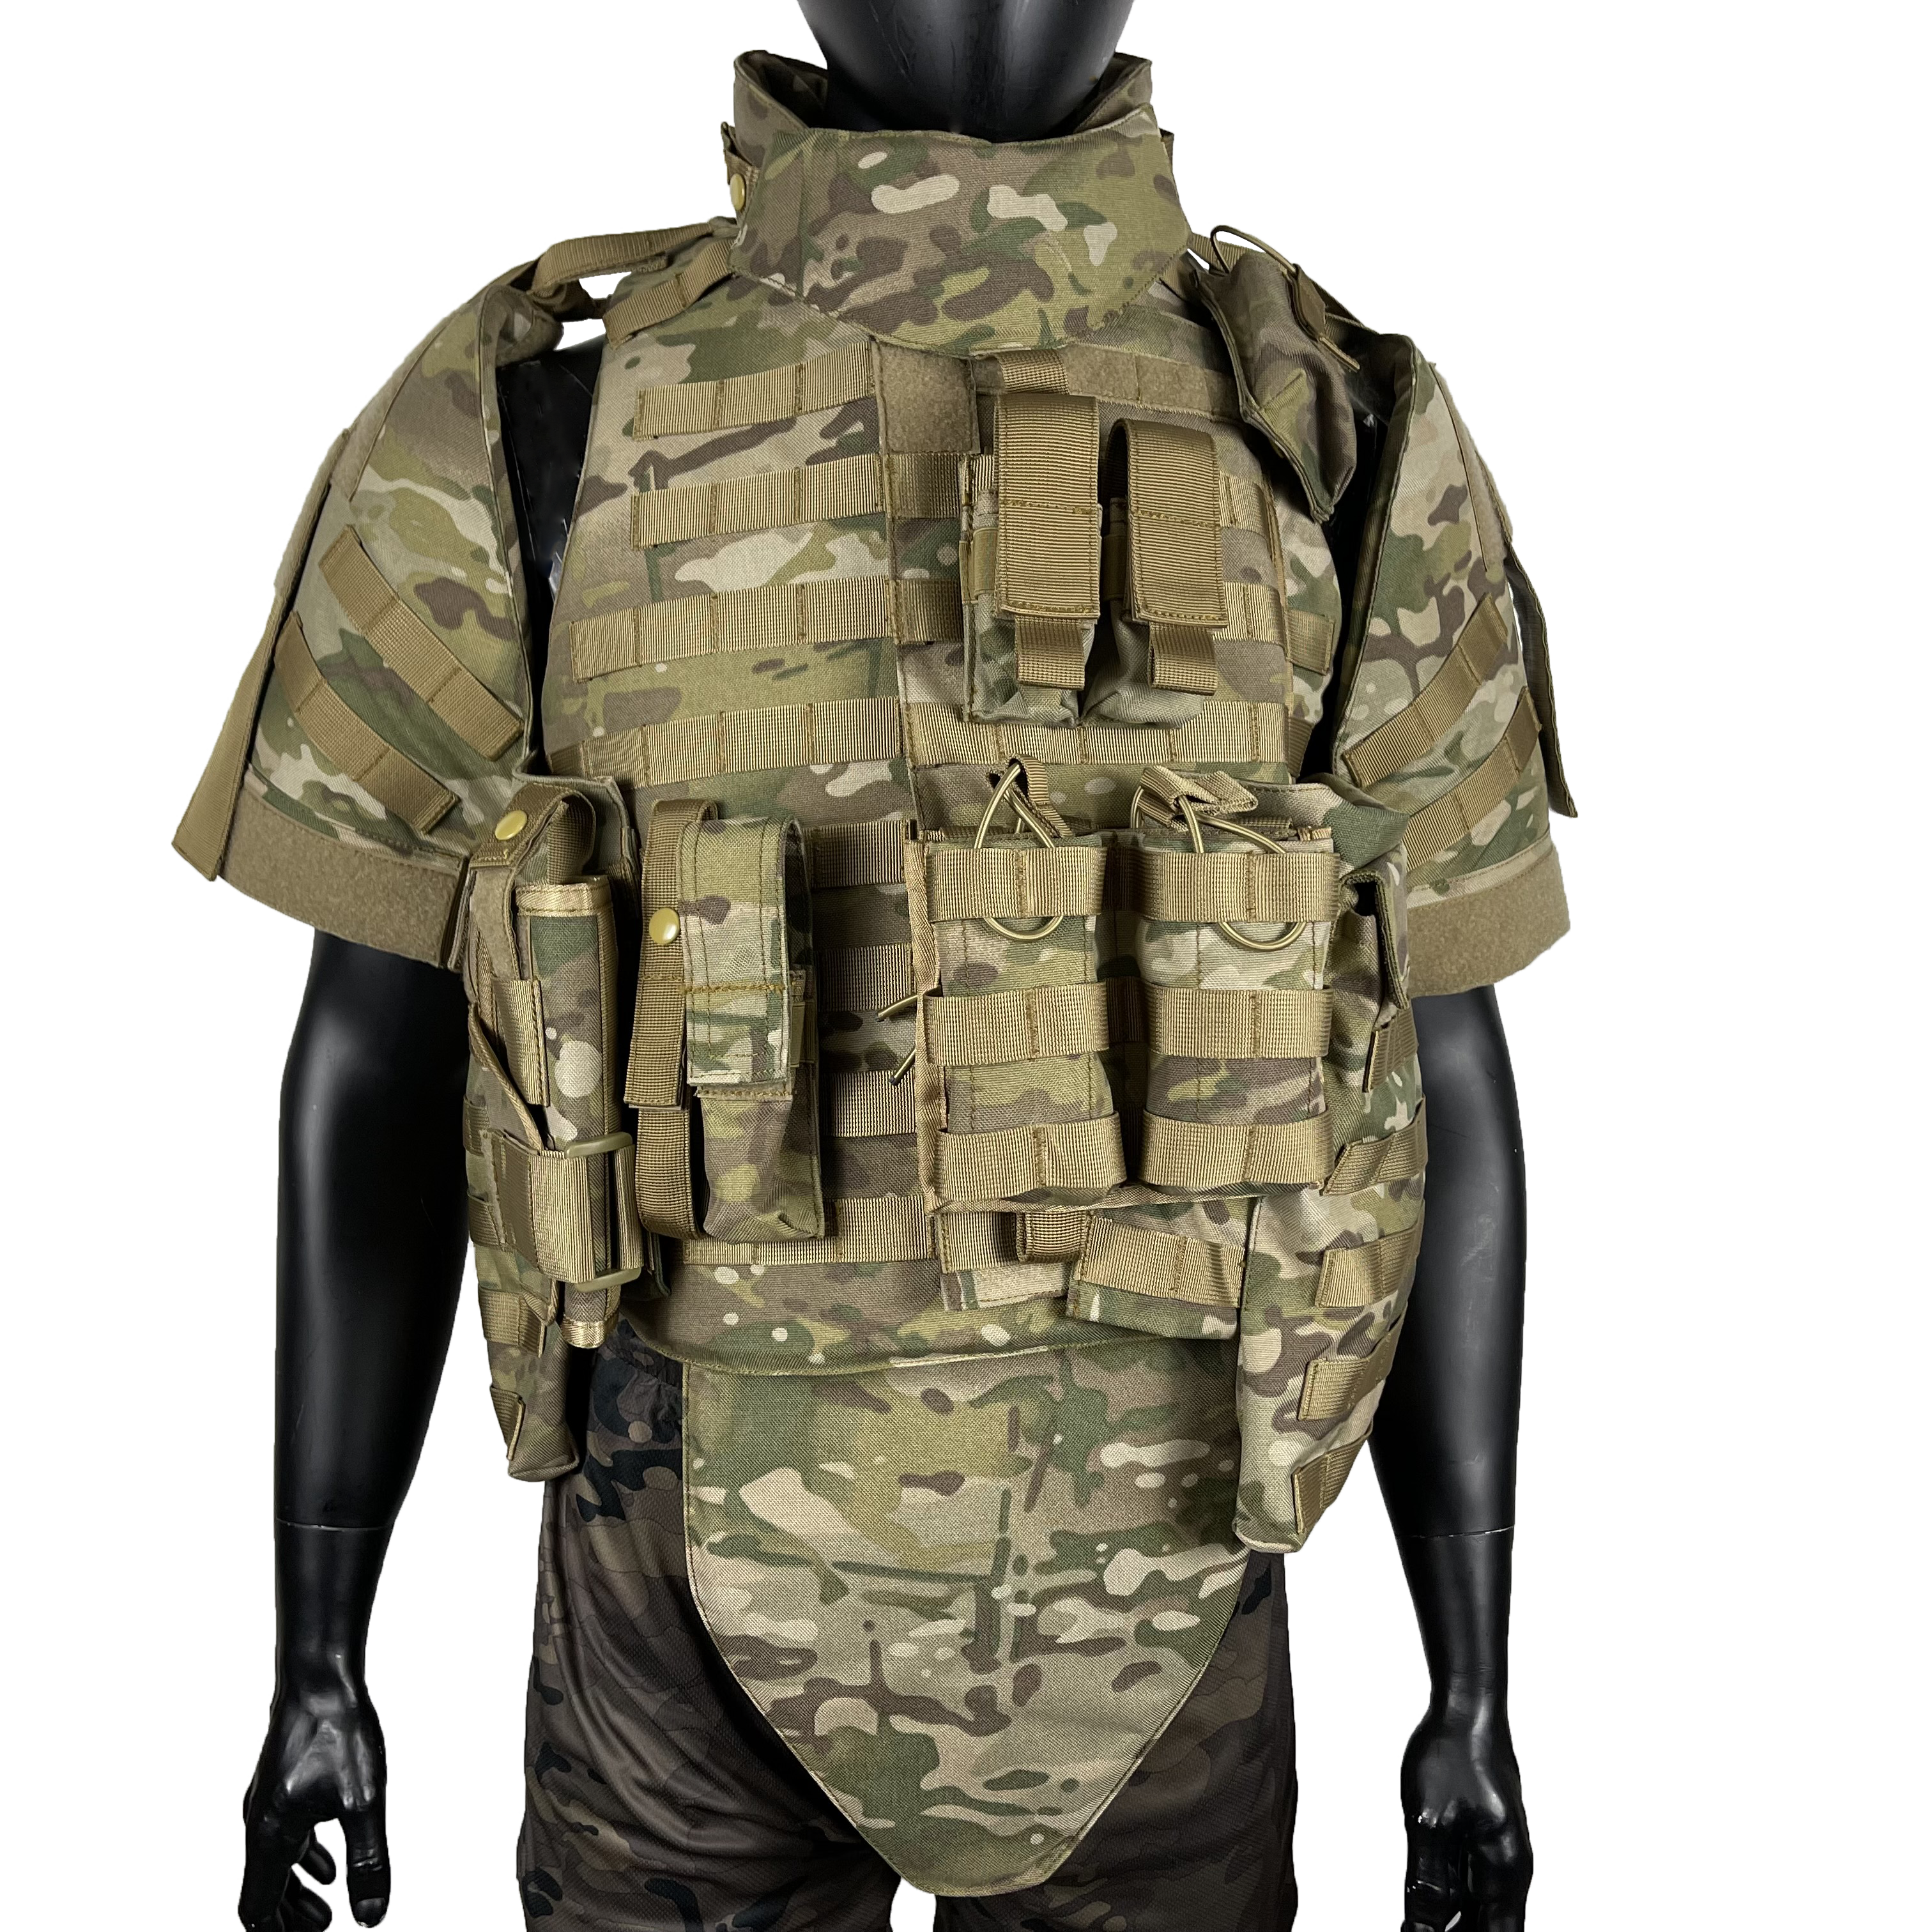 Tactical Armoured K9 Vest - Lightweight and Mobile